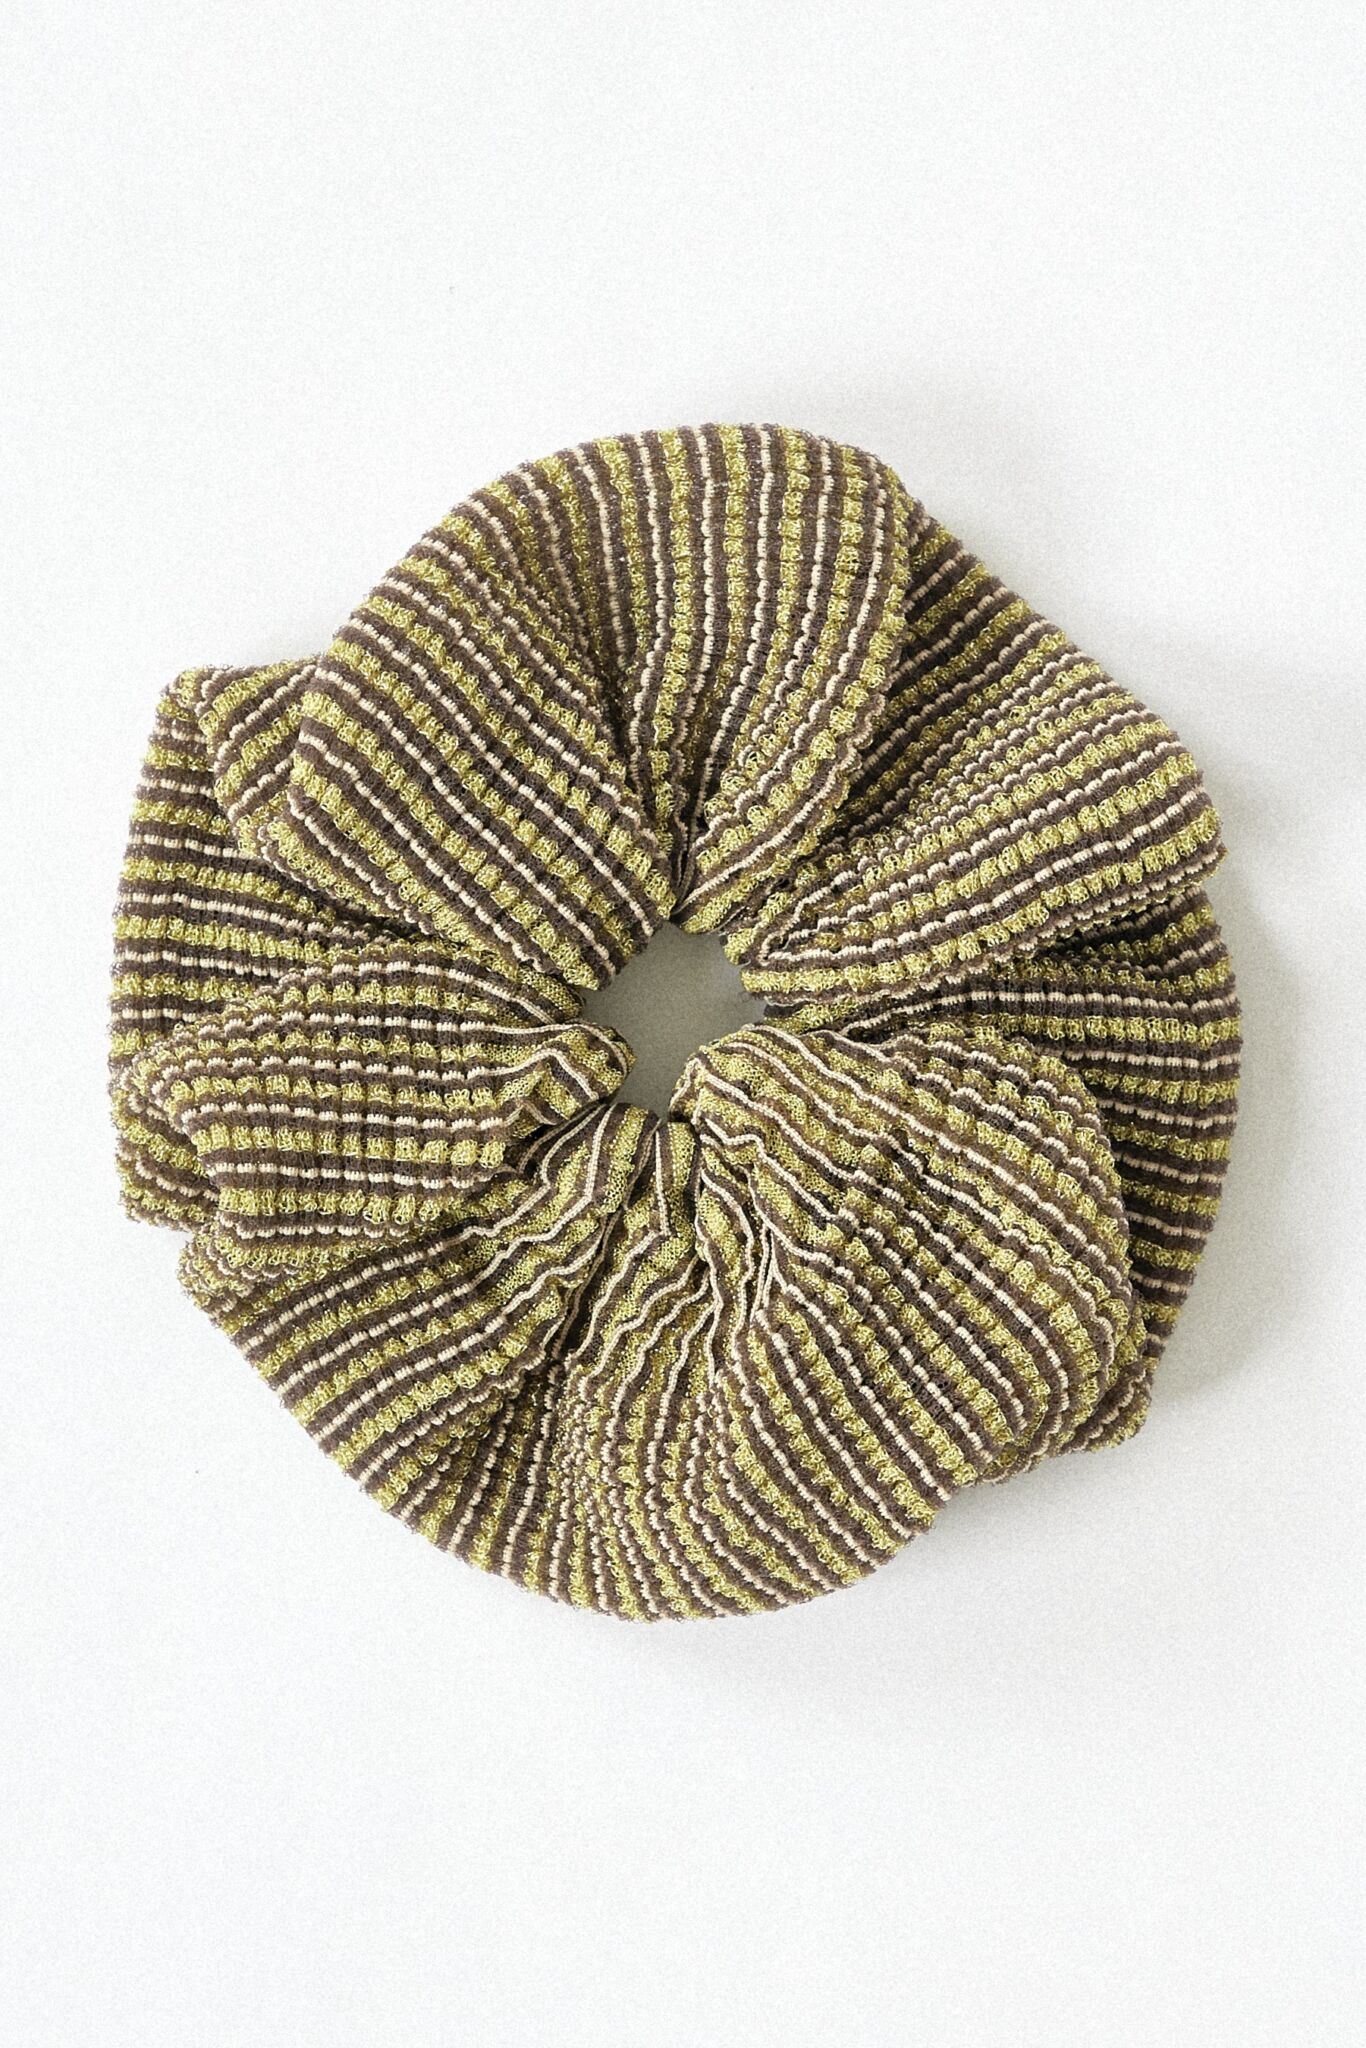 Dahlia Scrunchie in gold, knitted with glitter stripes